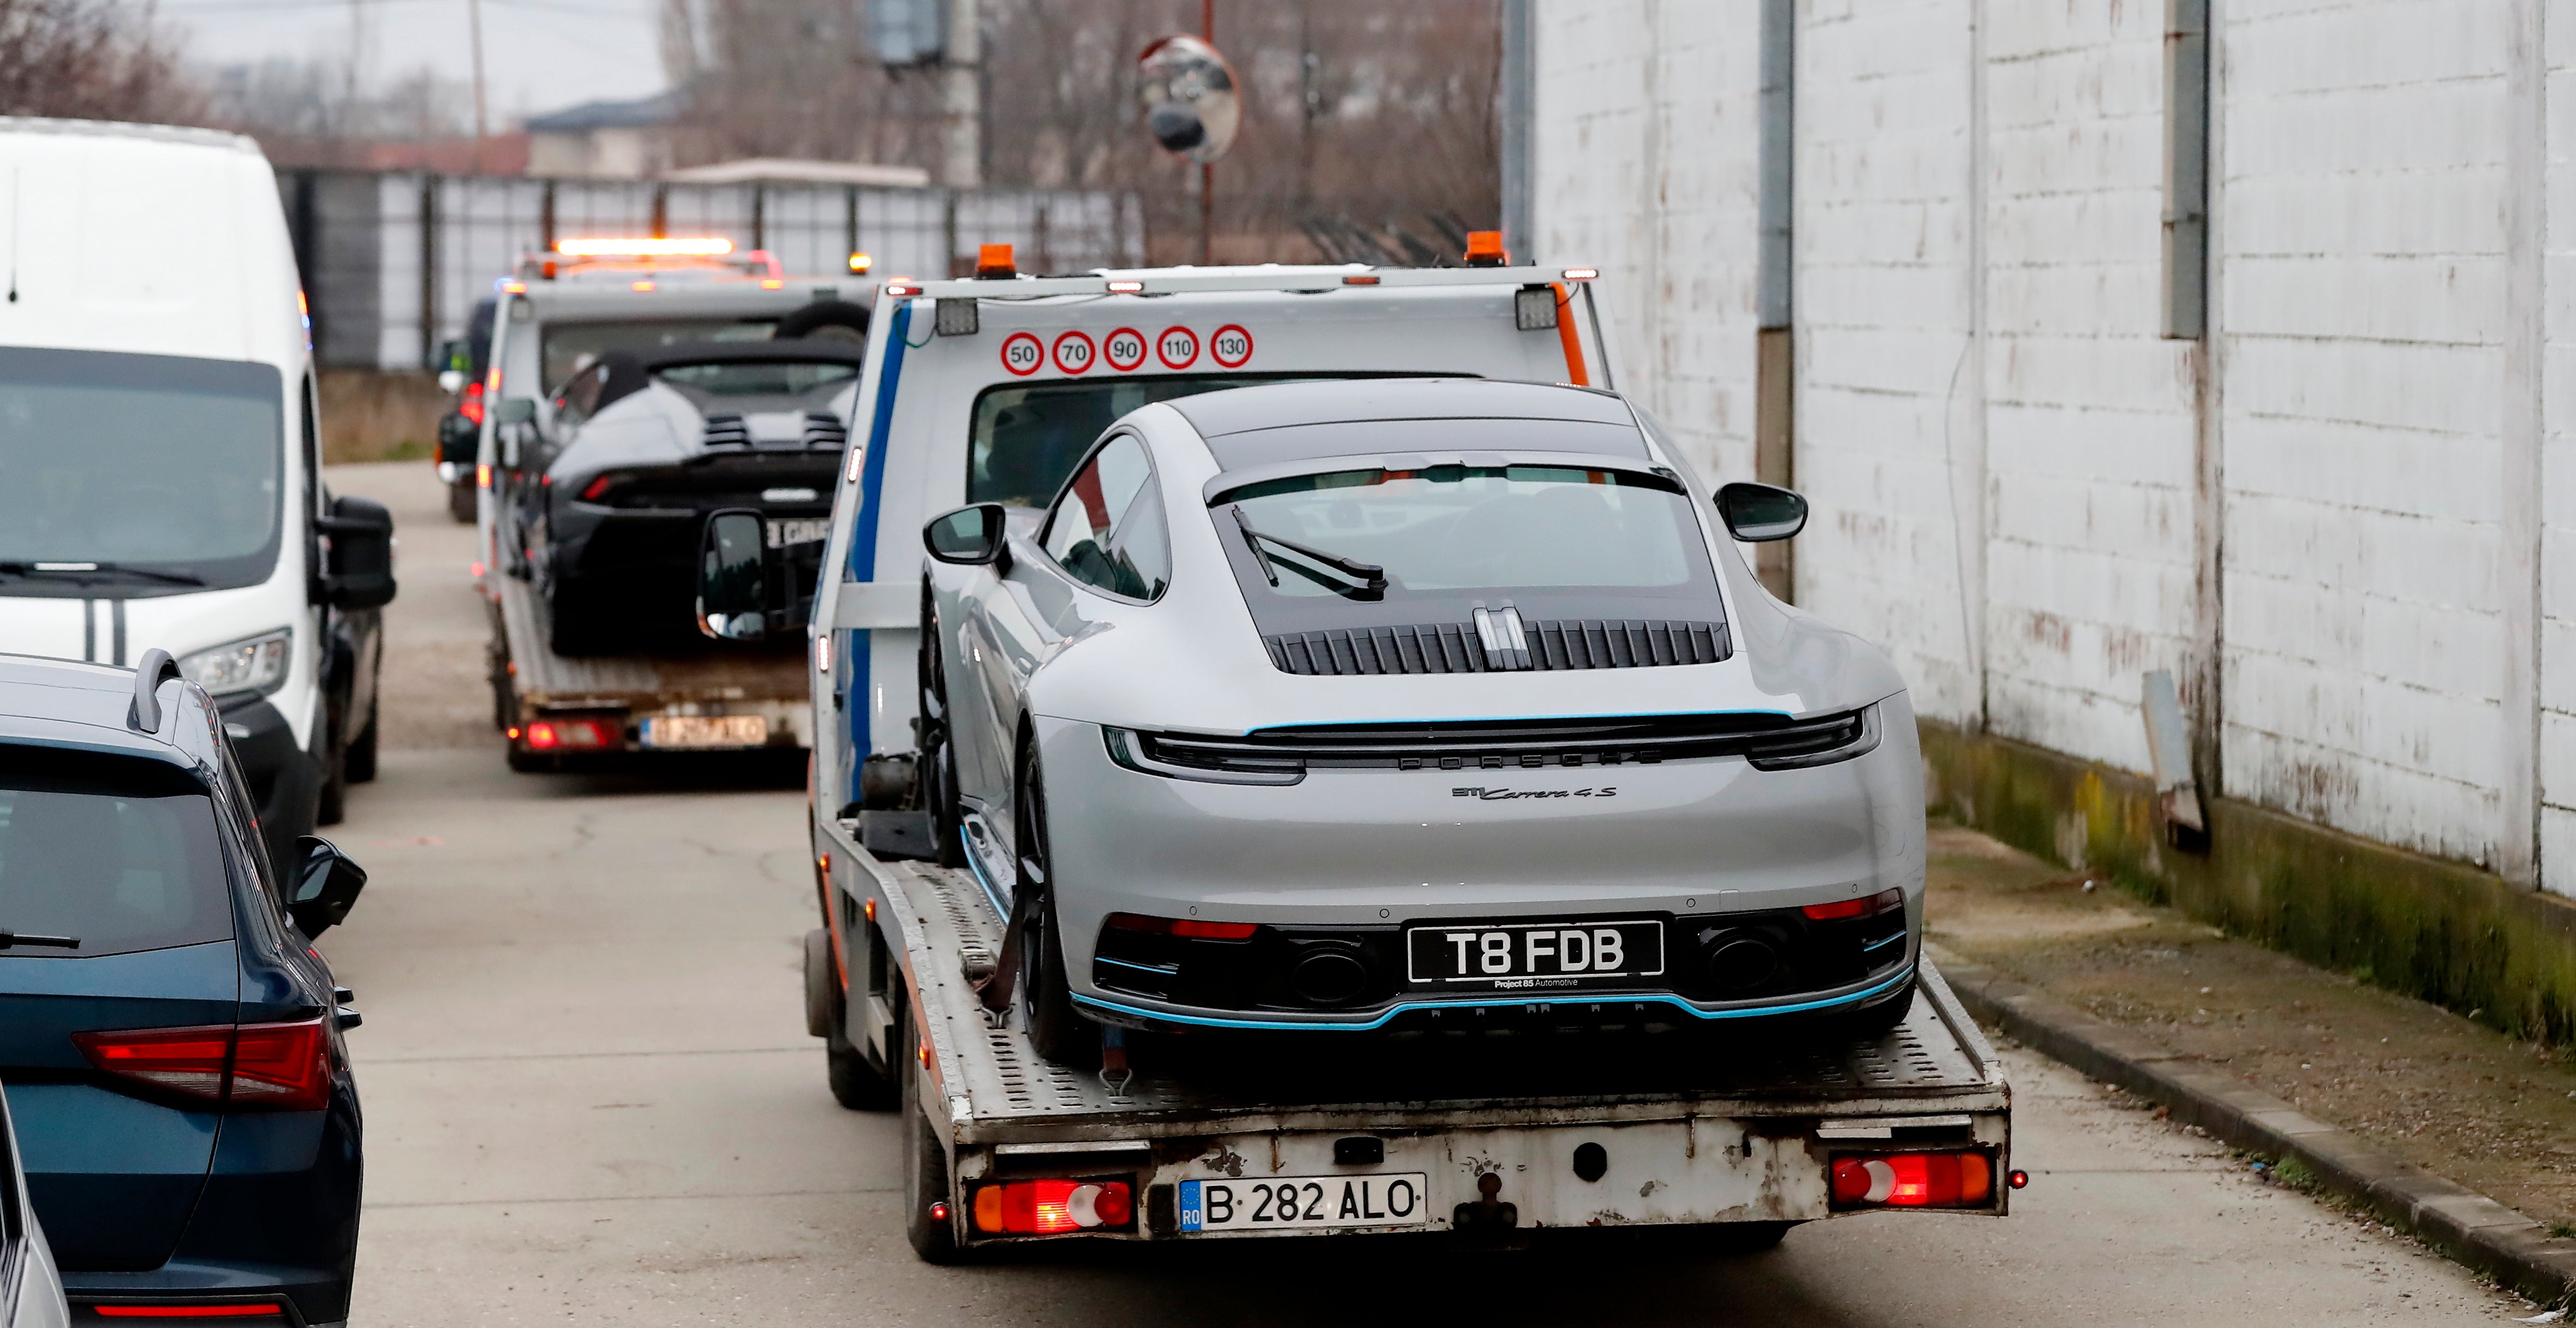 A grey Porsche Carrera owned by Andrew Tate is removed by officials